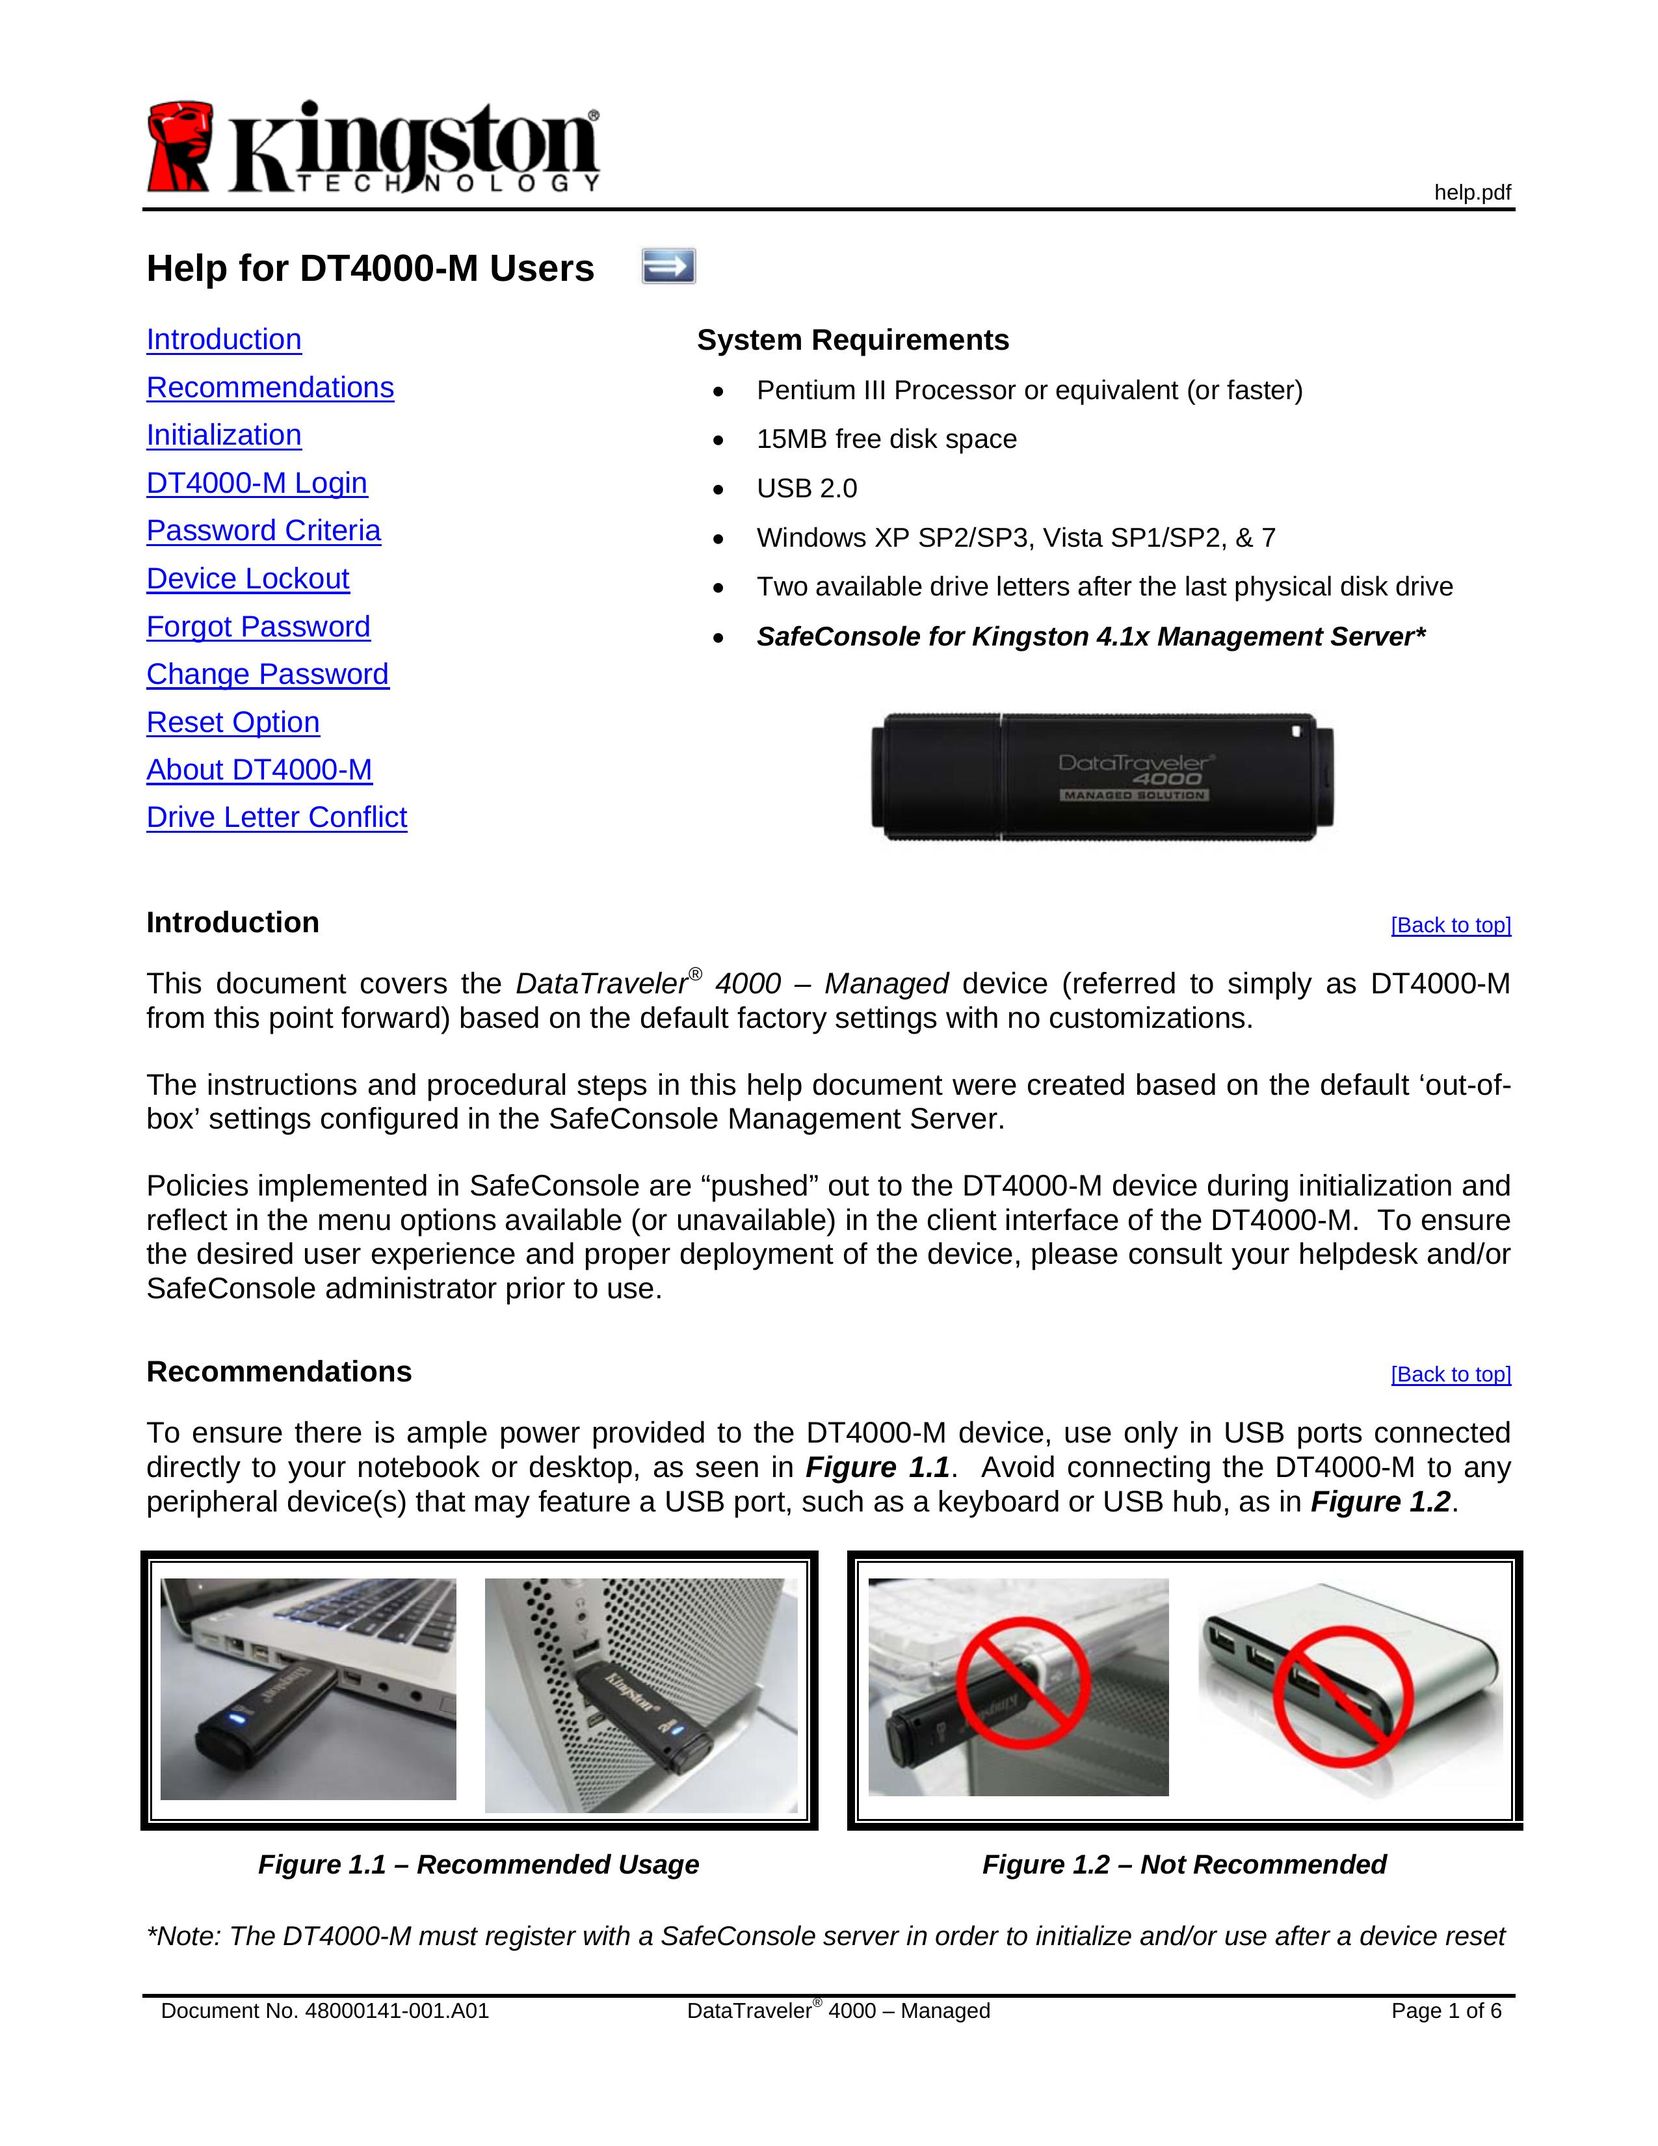 Kingston Technology DT4000 Computer Drive User Manual